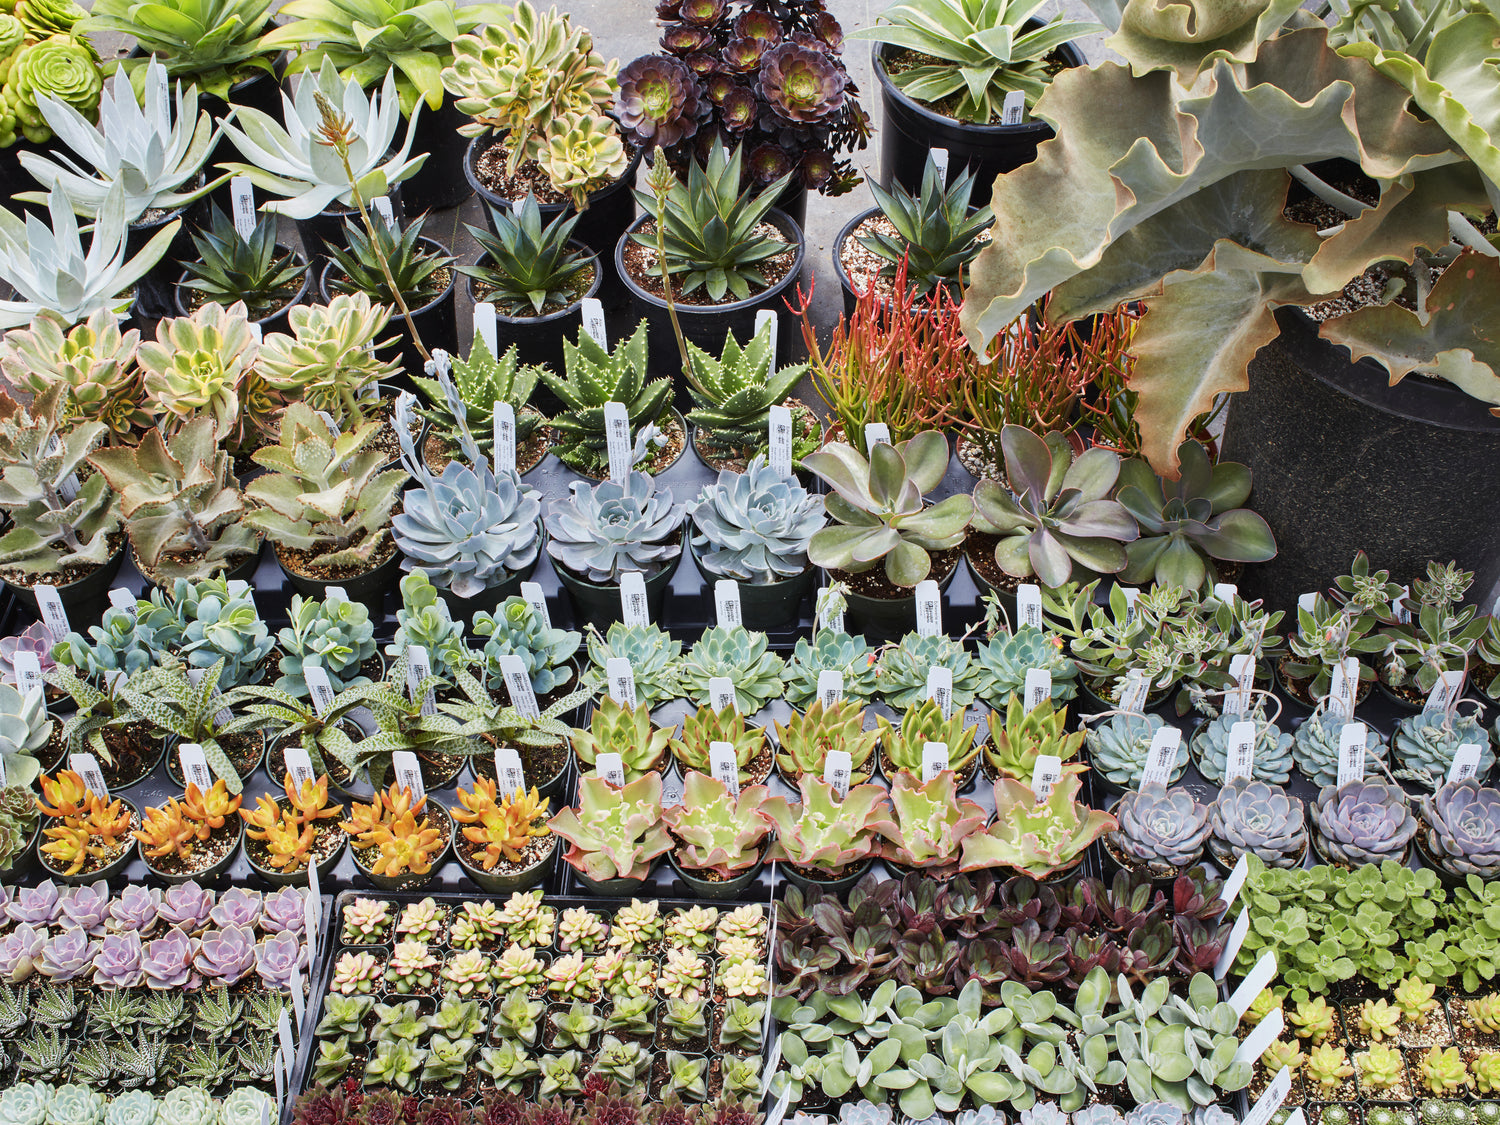 Succulent Care: A Slightly Different Point of View